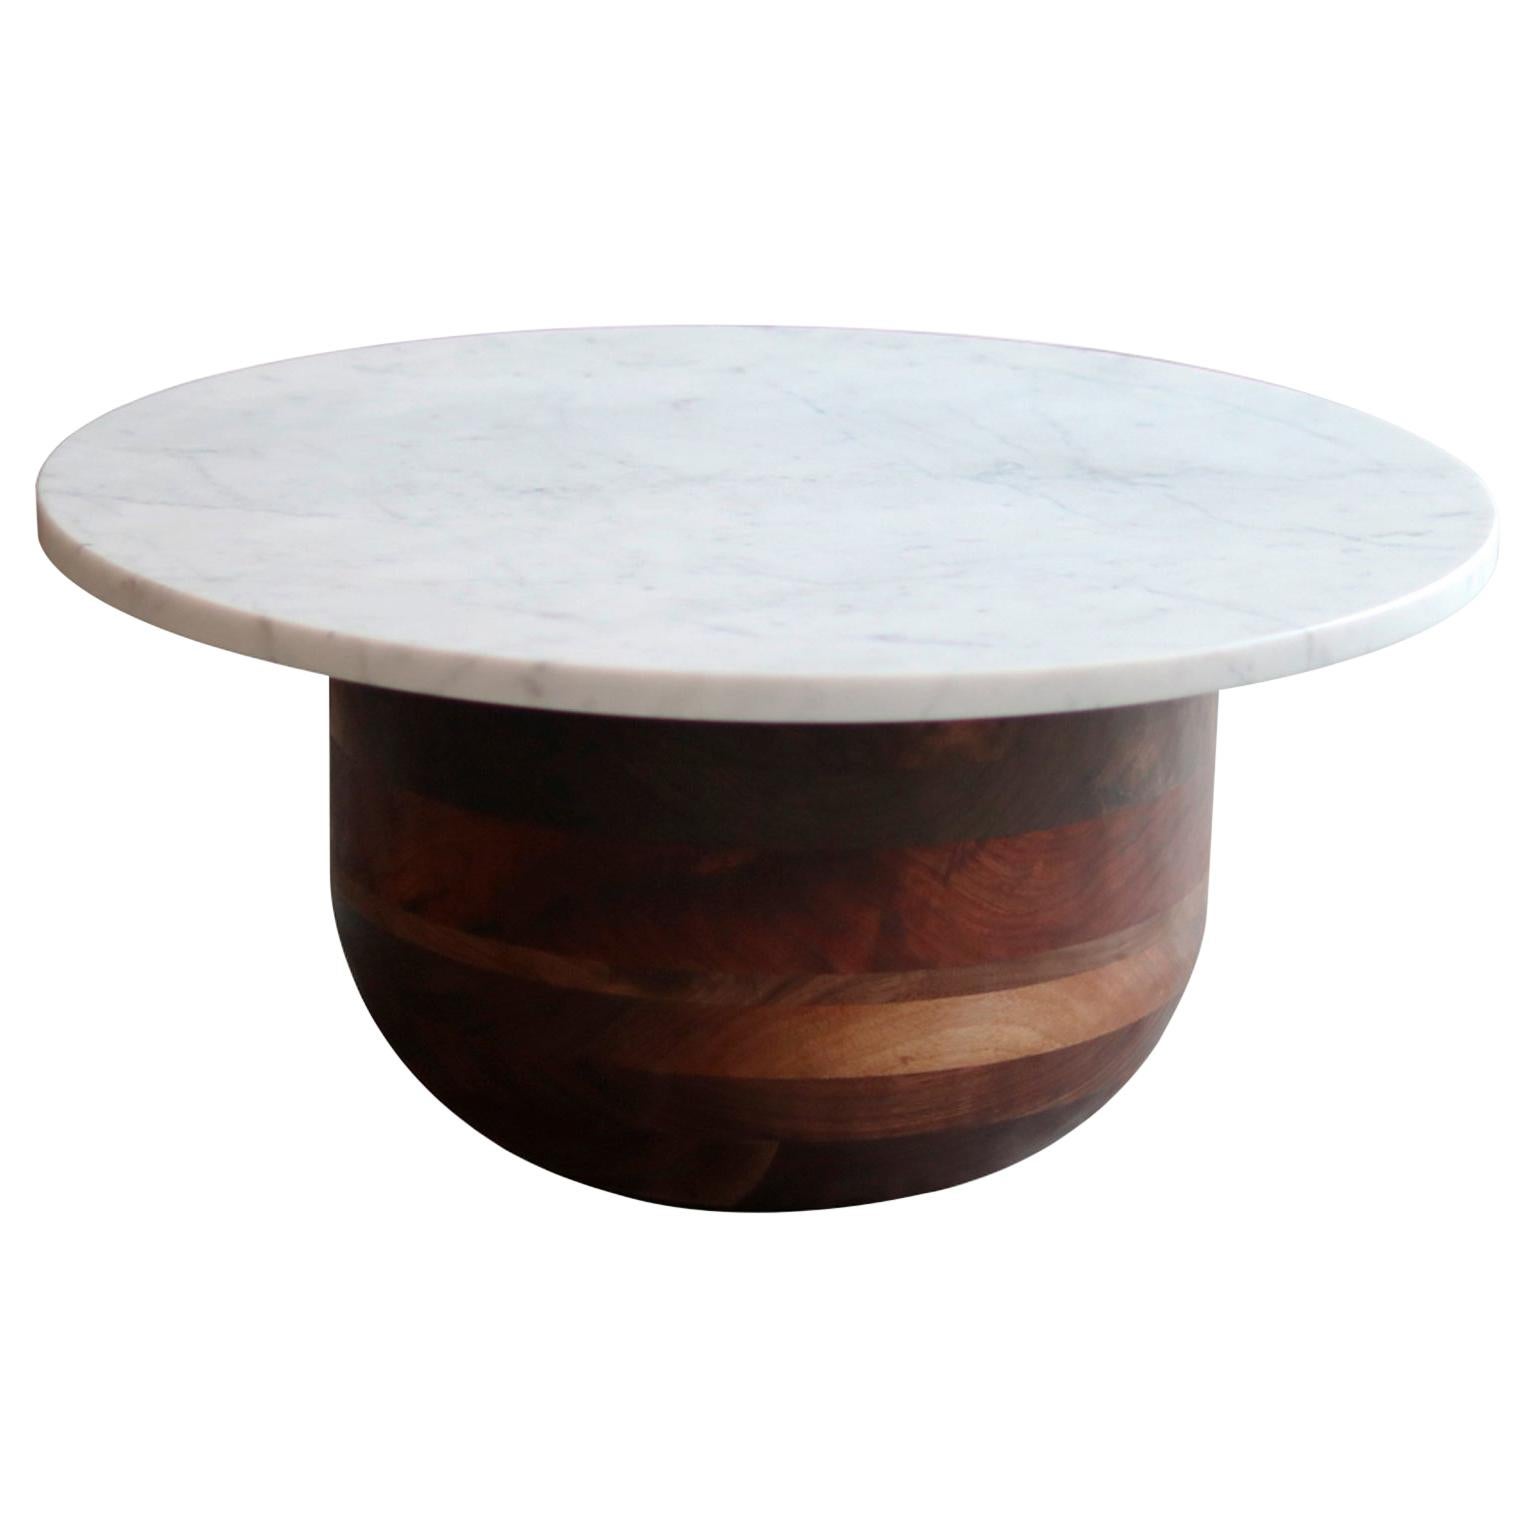 Bertrand Honed Carrera Marble and Walnut Round Pedestal Side Table